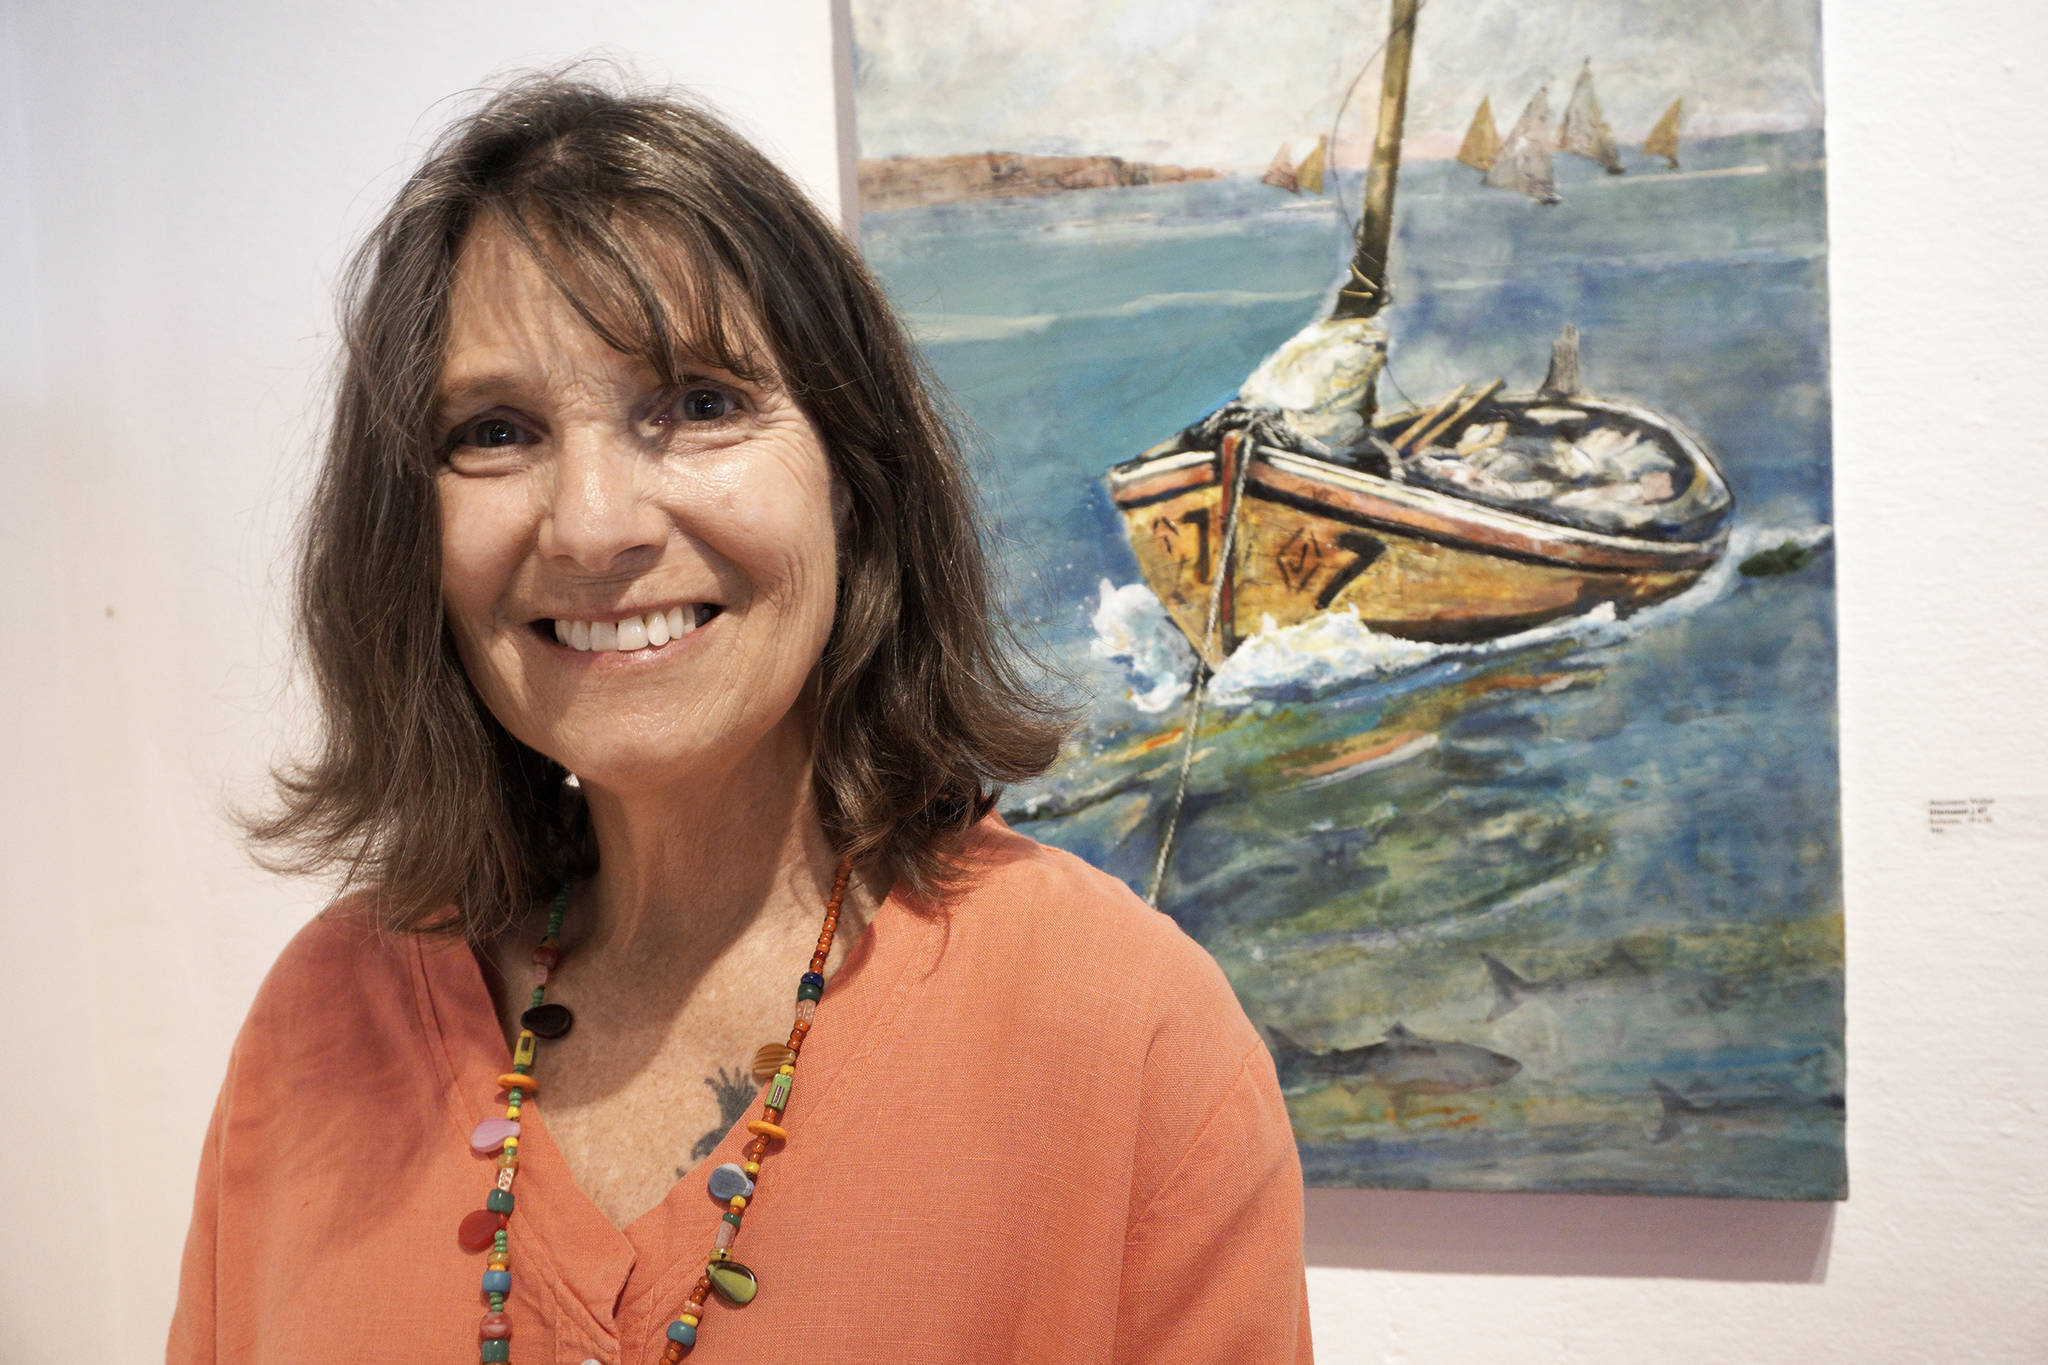 Walker’s paintings seek ‘a sense of the past and the present’